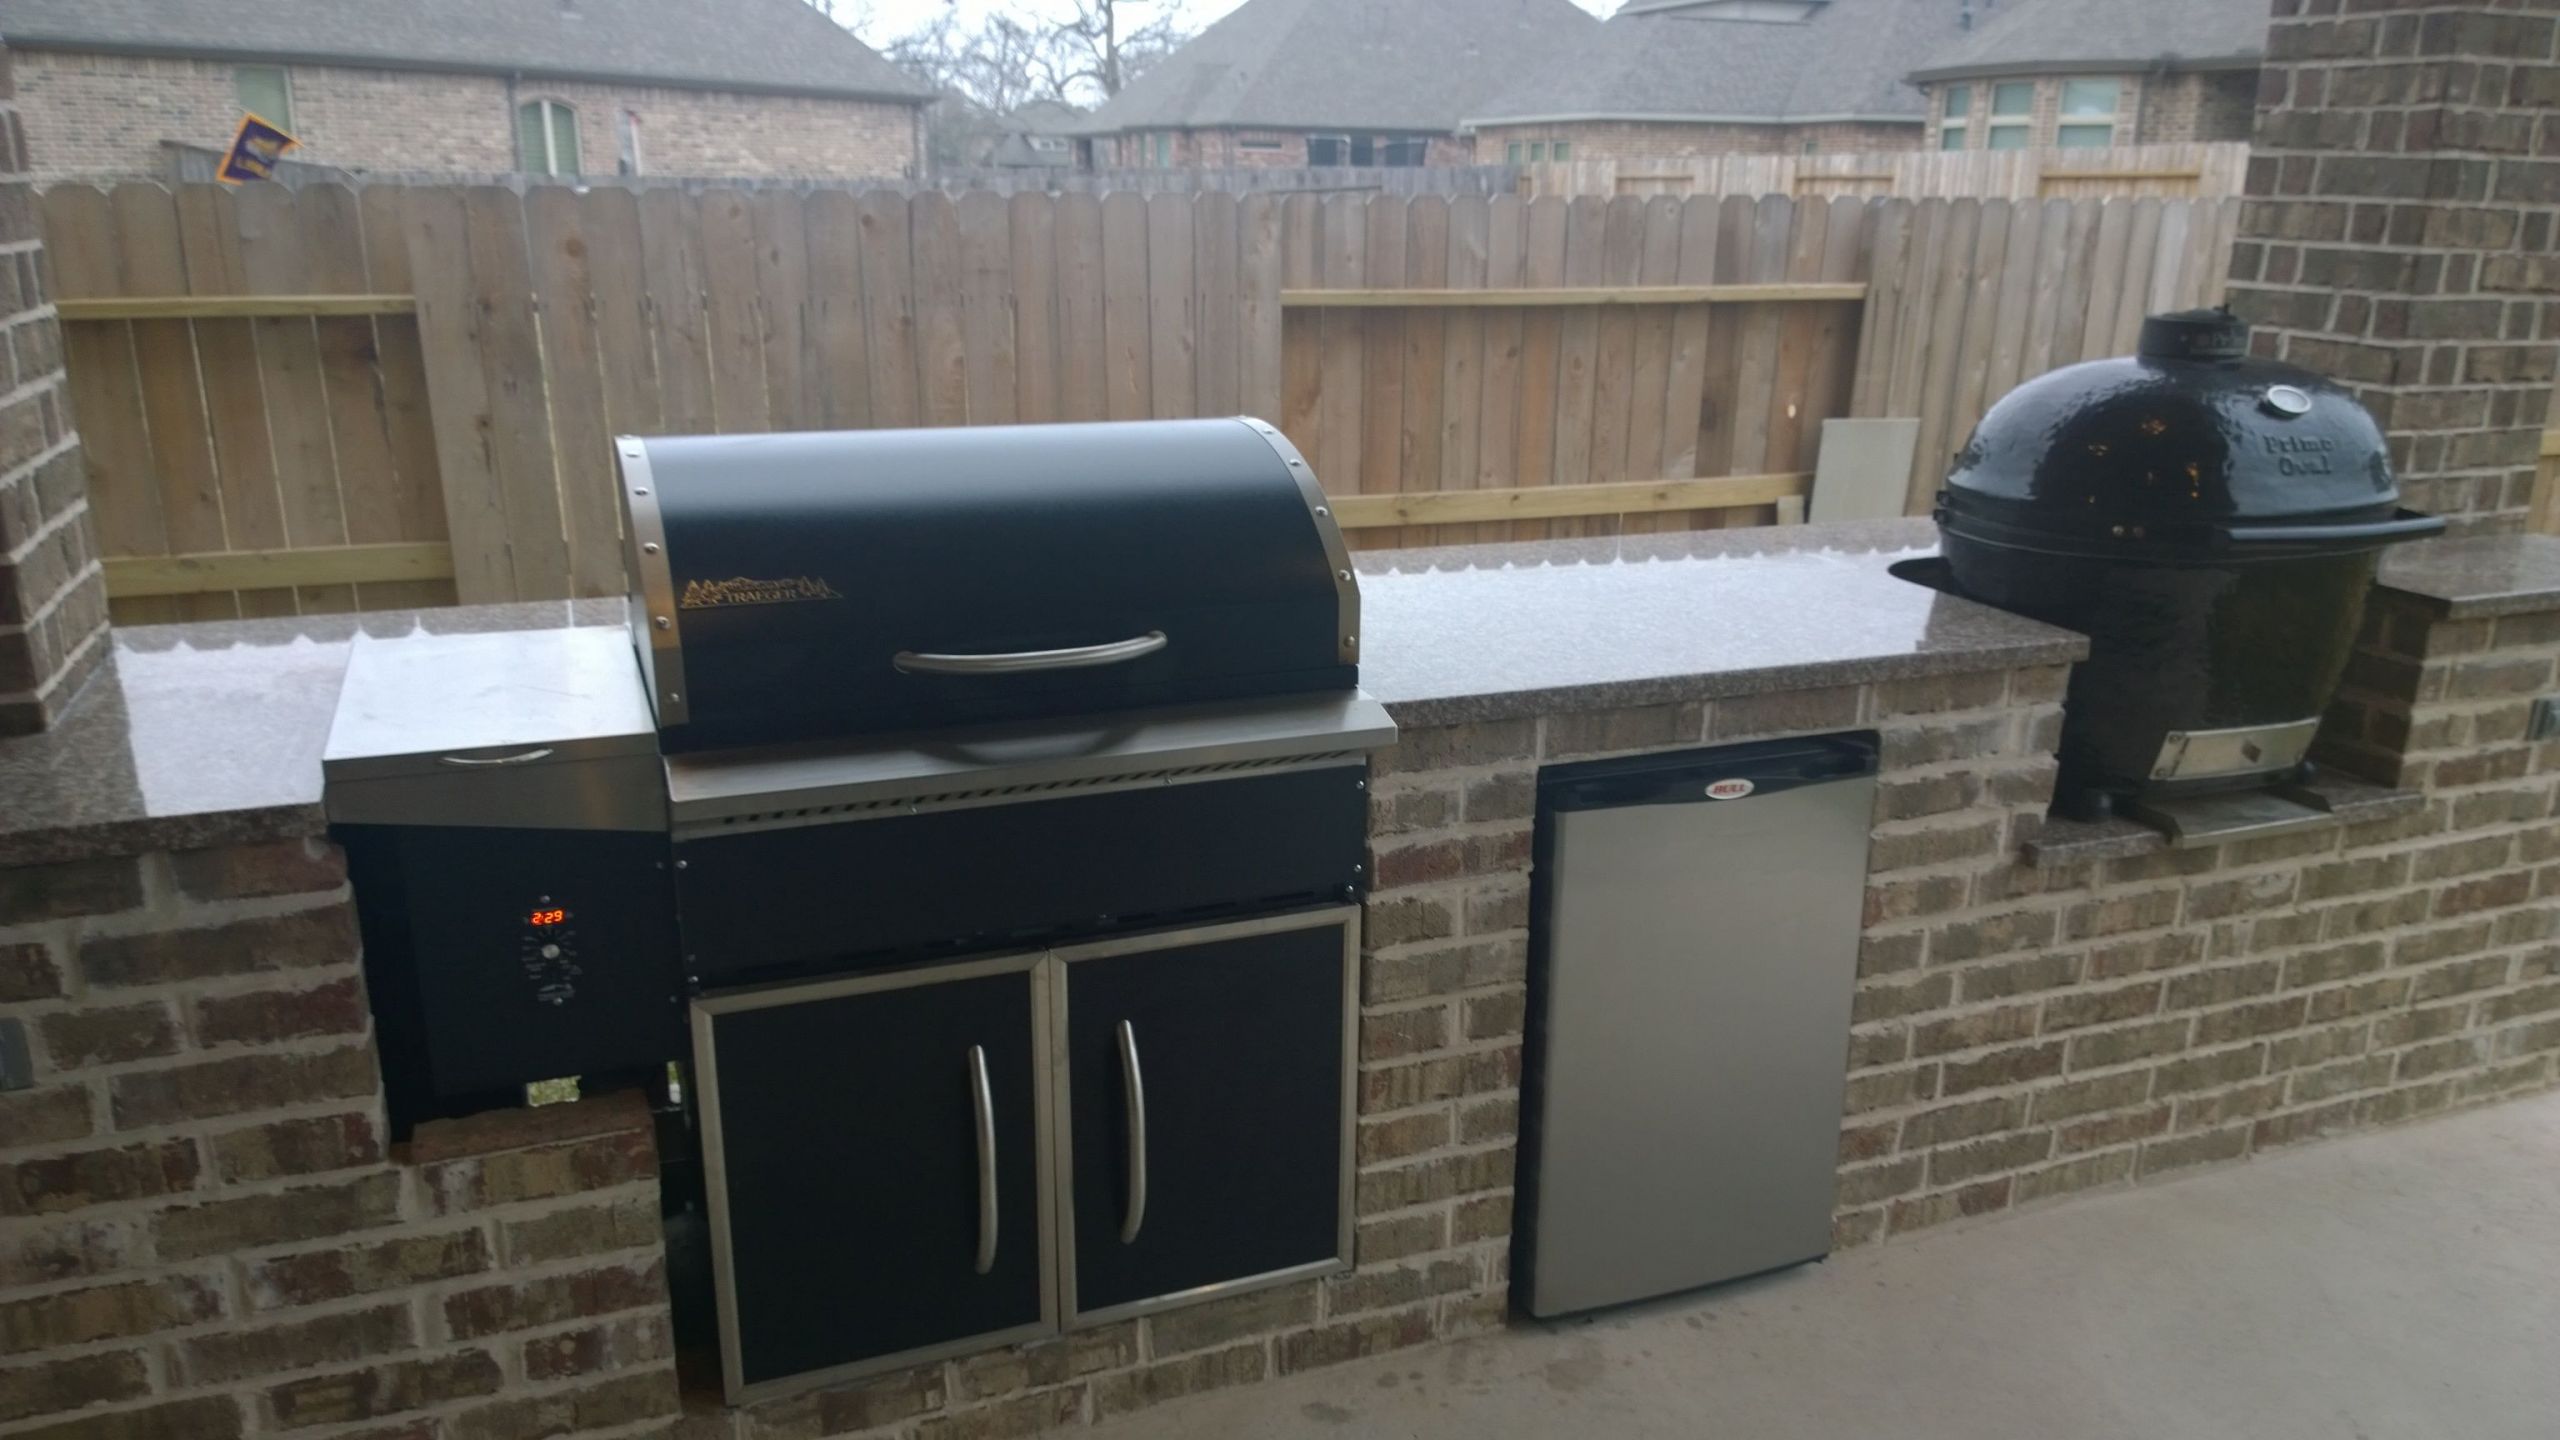 Traeger Built In Outdoor Kitchen
 Pin on Ideas for my garden